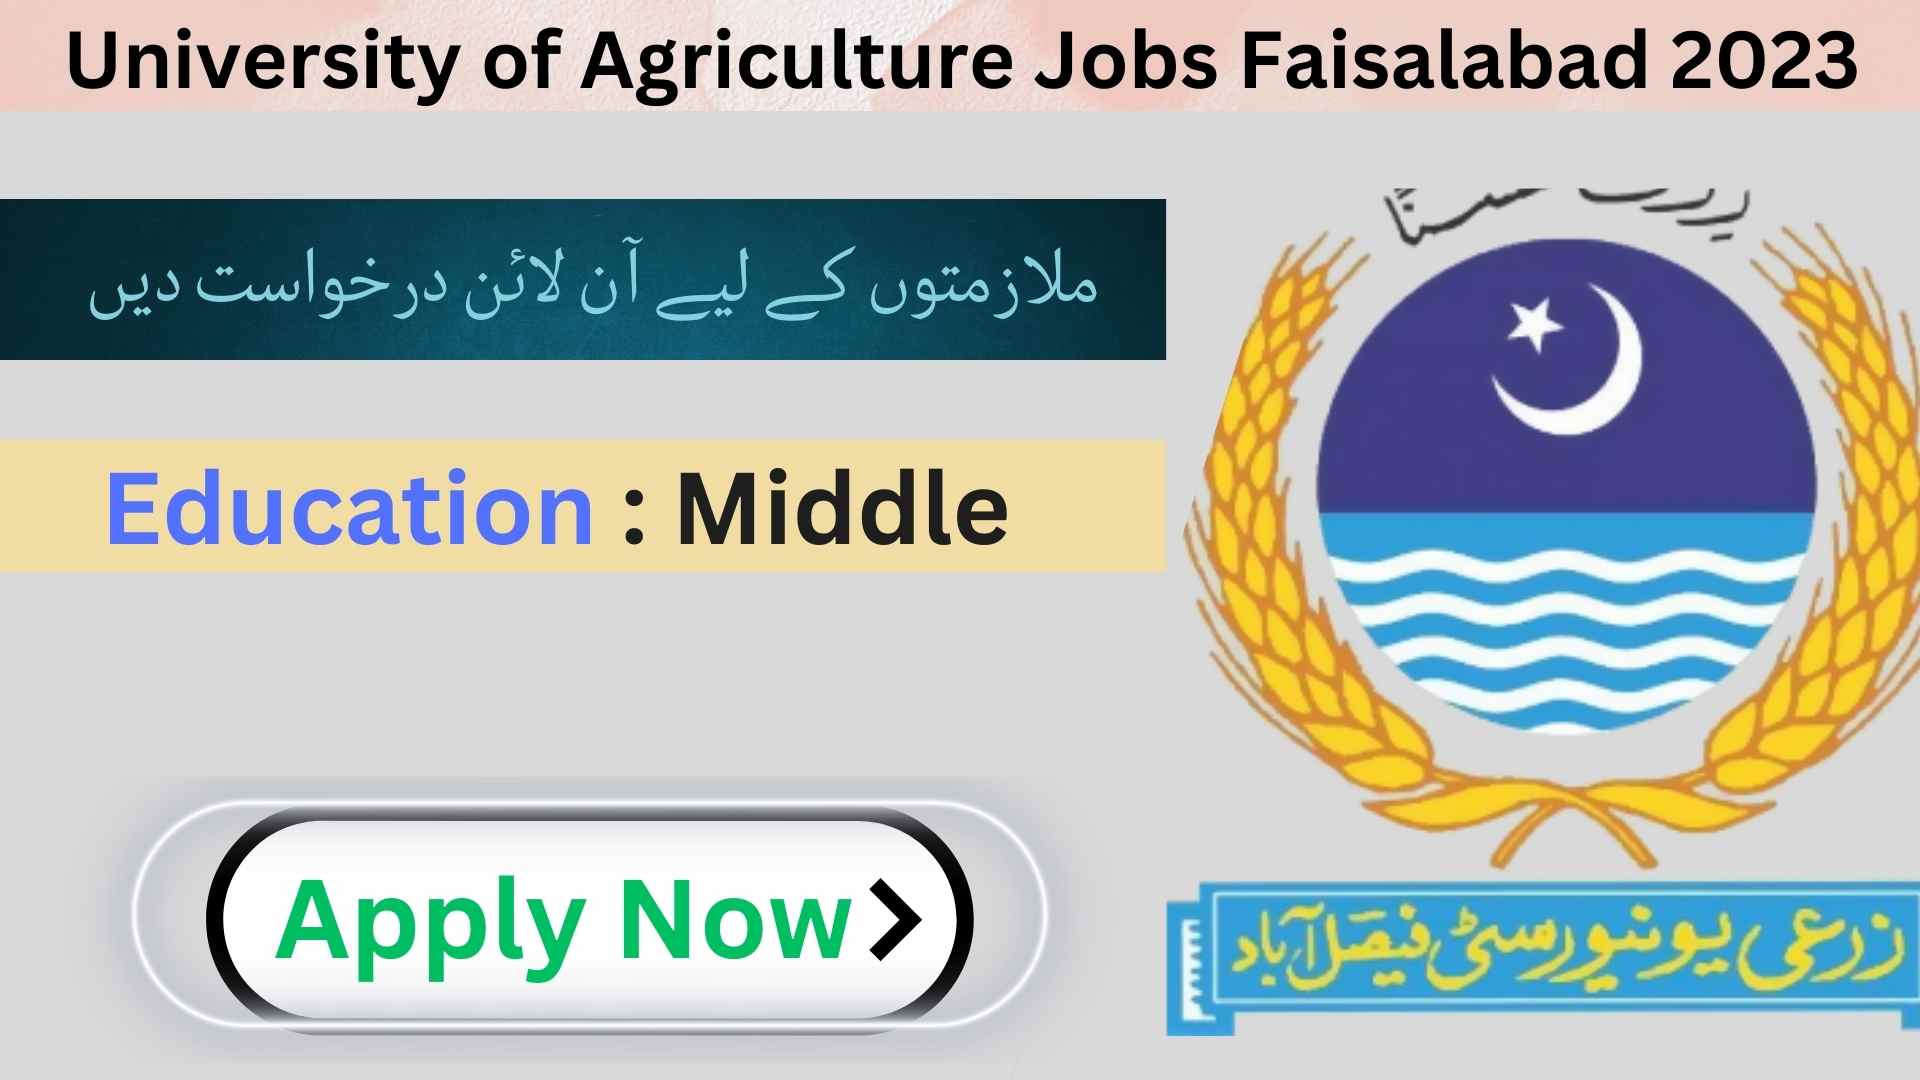 Latest University of Agriculture UAF Research Jobs Faisalabad 2023